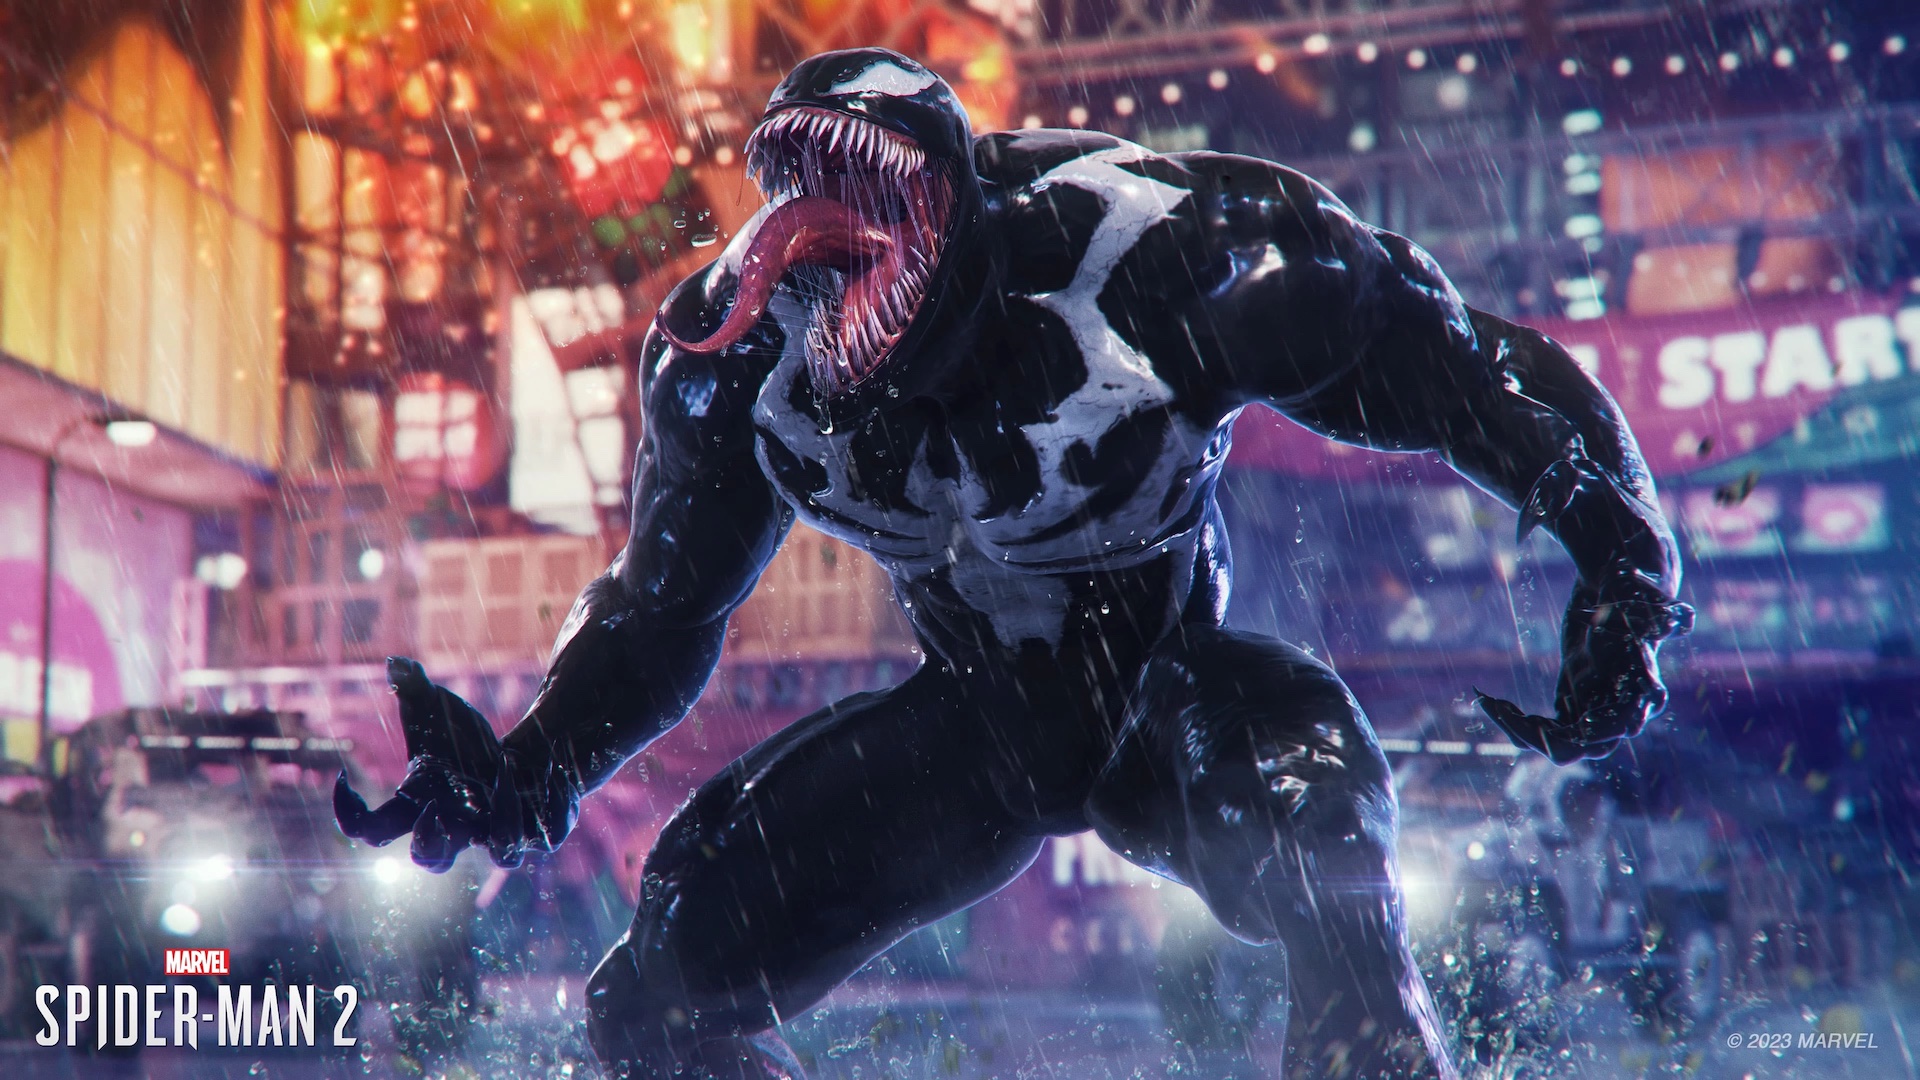 Who is Venom in Marvel's Spider-Man 2? We predict who is under the mask